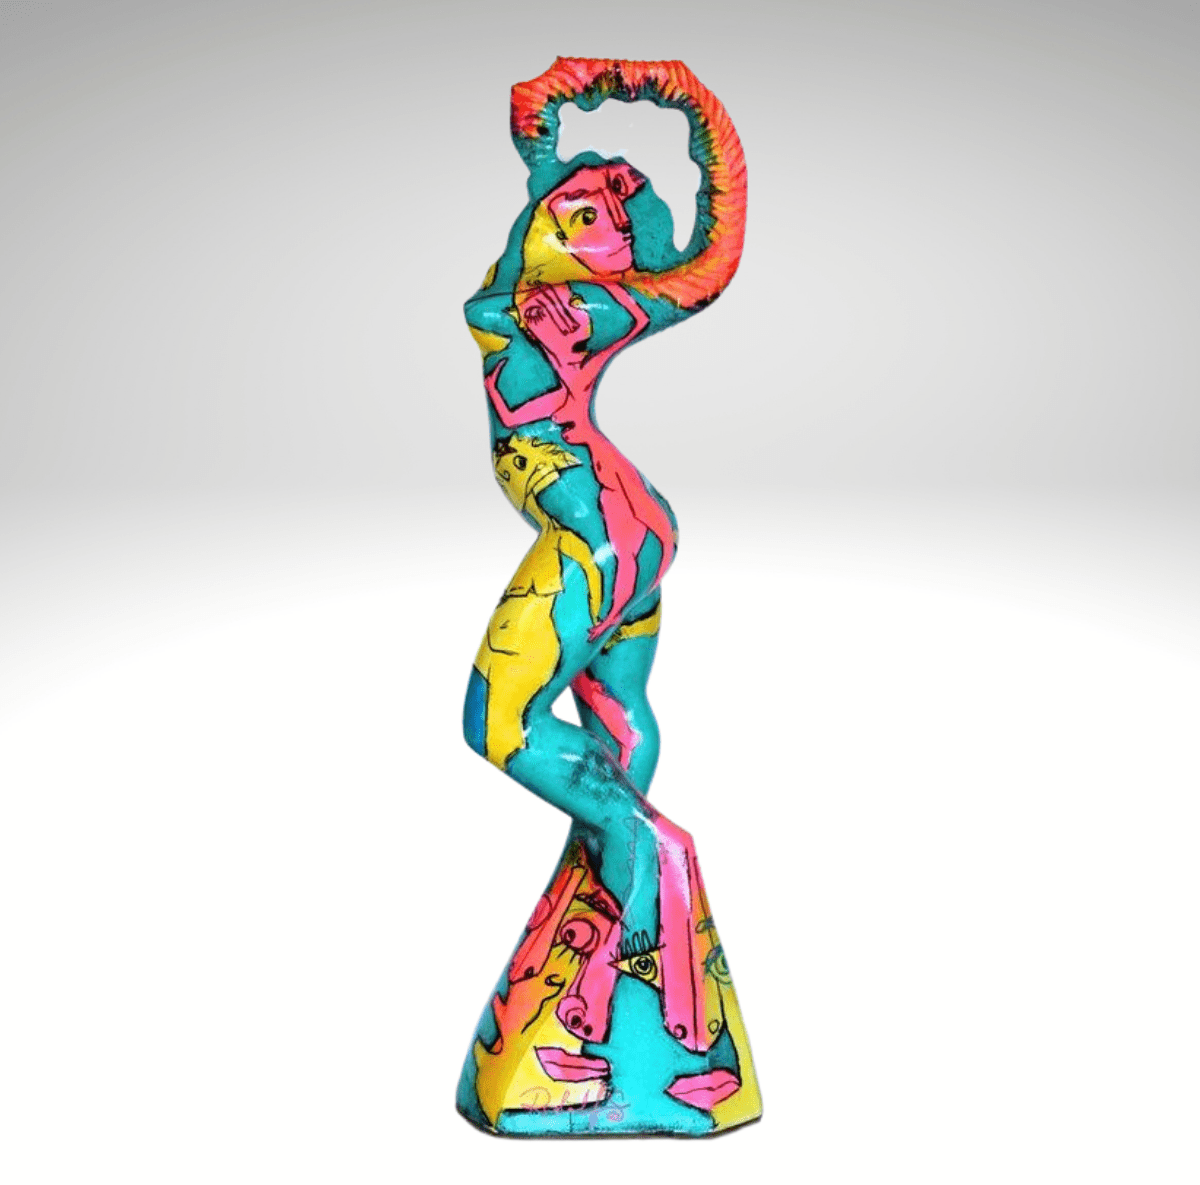 Contemporary Sculpture. Title: Saudade, Resin & Paint, 10x7x32in by Contemporary Canadian artist Rudolf Sokolovski.